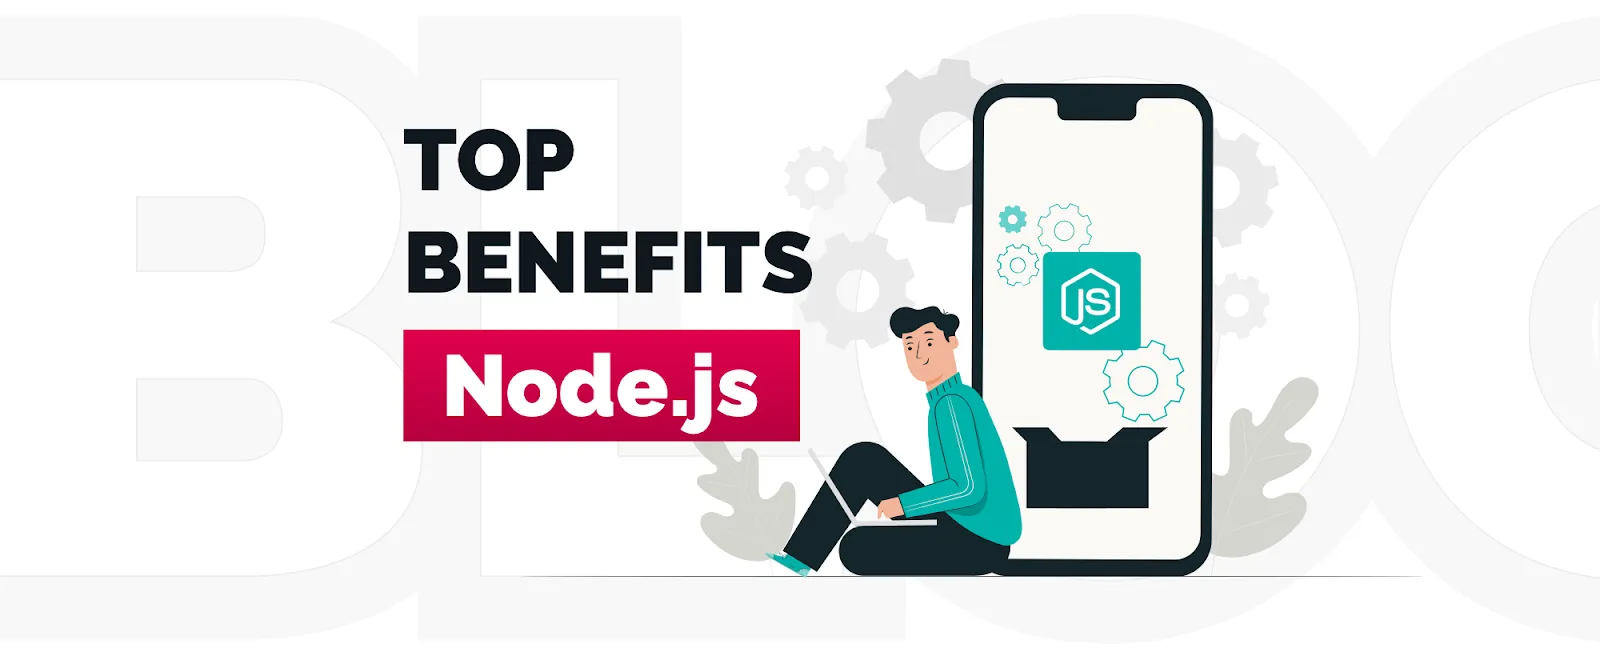 Why use Node.js for Web Development? Benefits and Examples of Apps